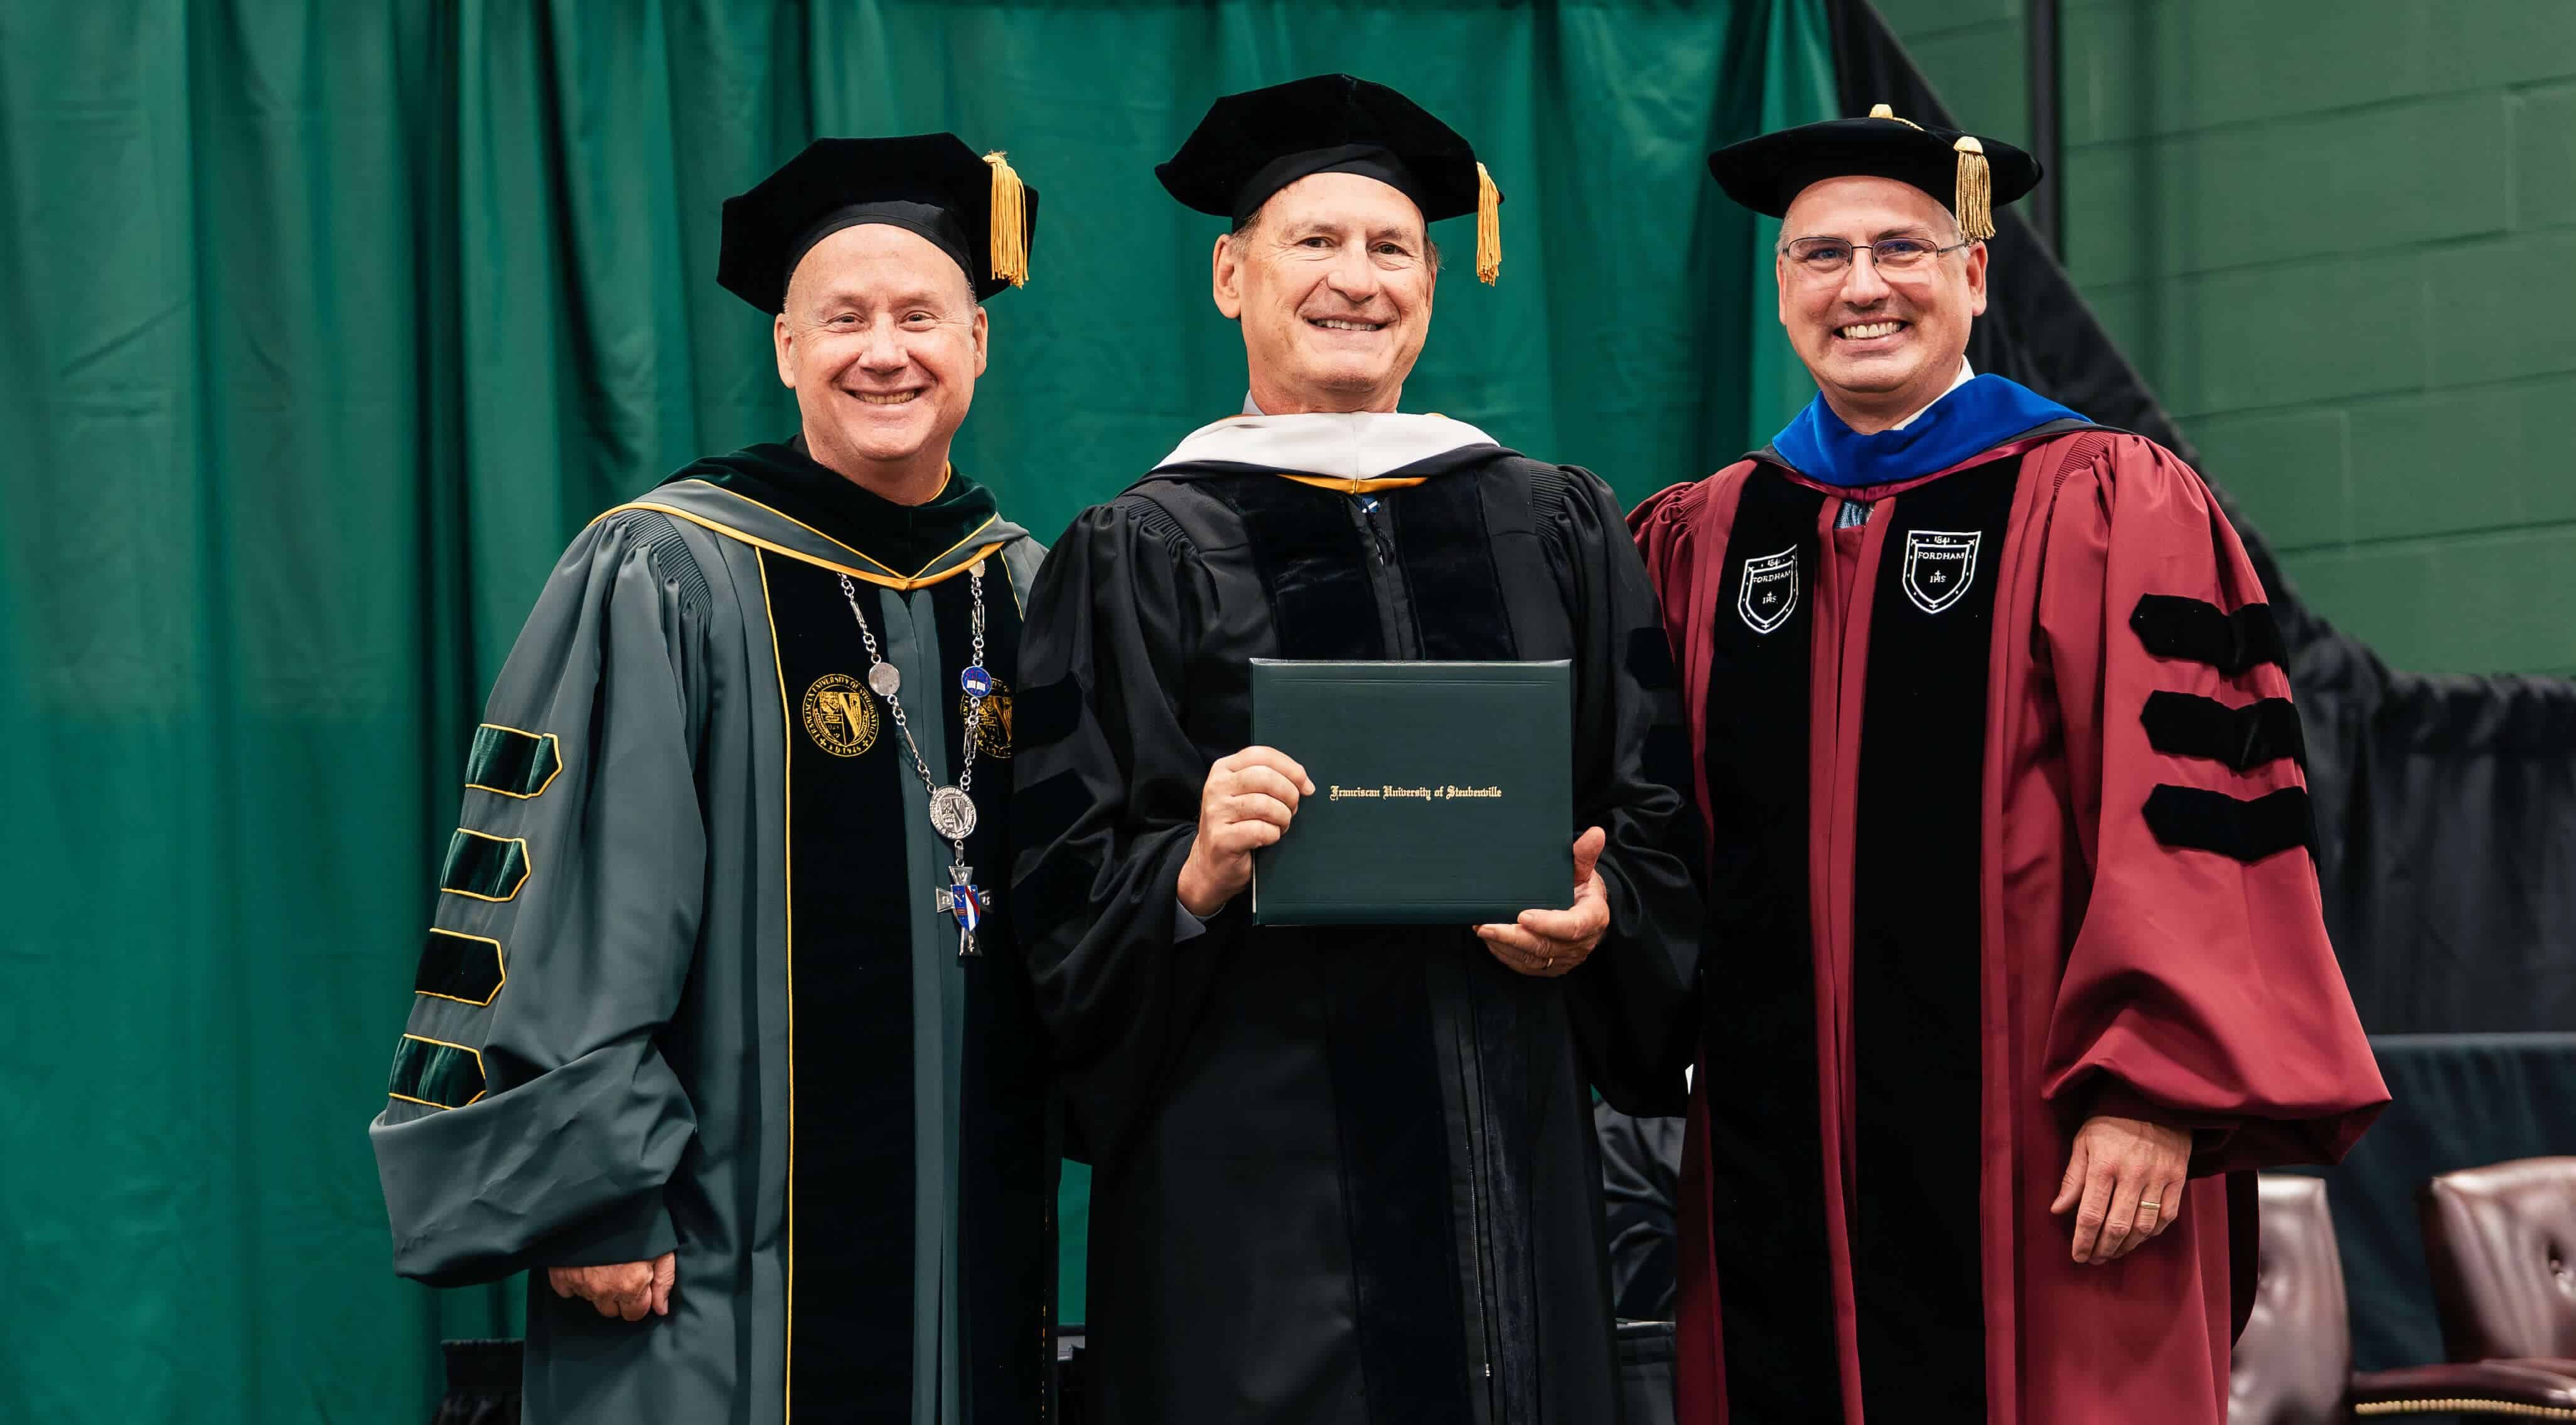 President Fr. Dave Pivonka, TOR ’89, Justice Samuel A. Alito Jr., and Vice President of Academic Affairs Dr. Stephen Hildebrand